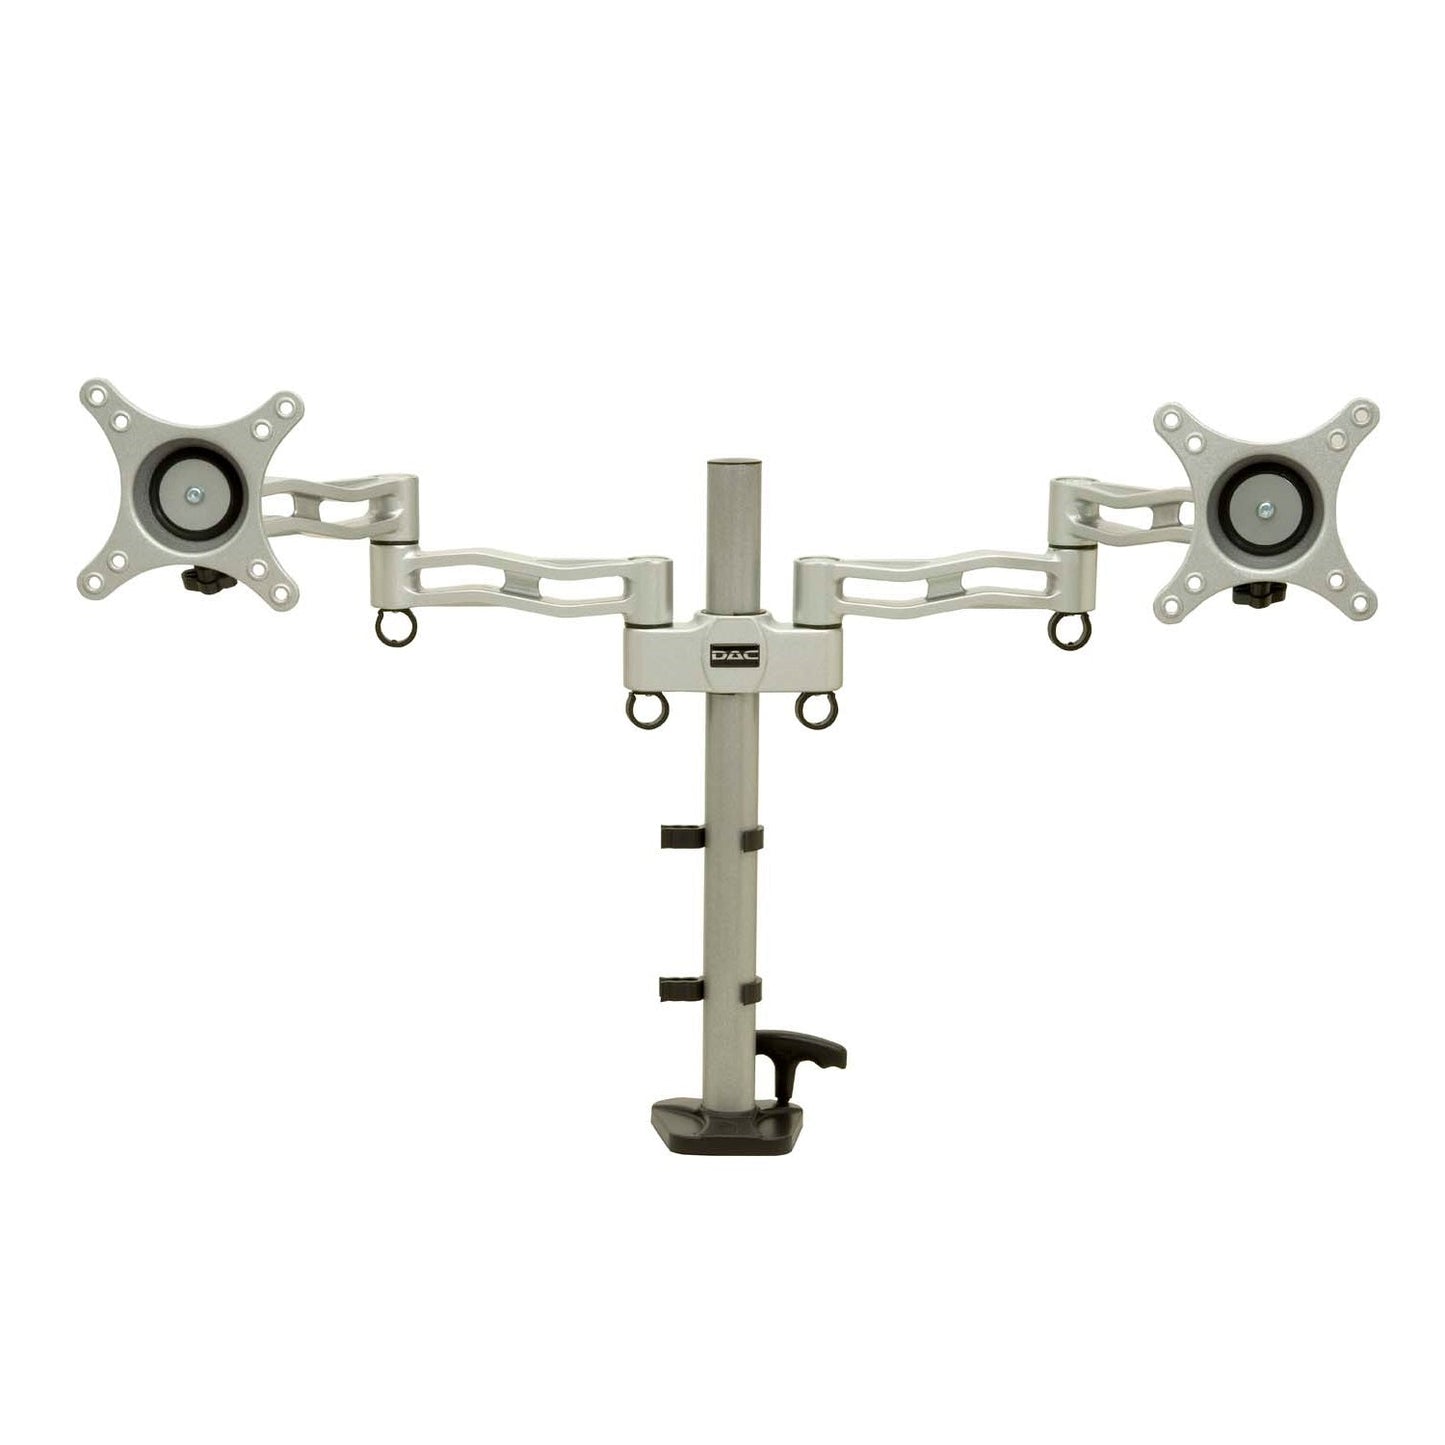 DAC® MP-200 Duo™ Height Adjustable Dual Articulating Monitor Arm, Silver